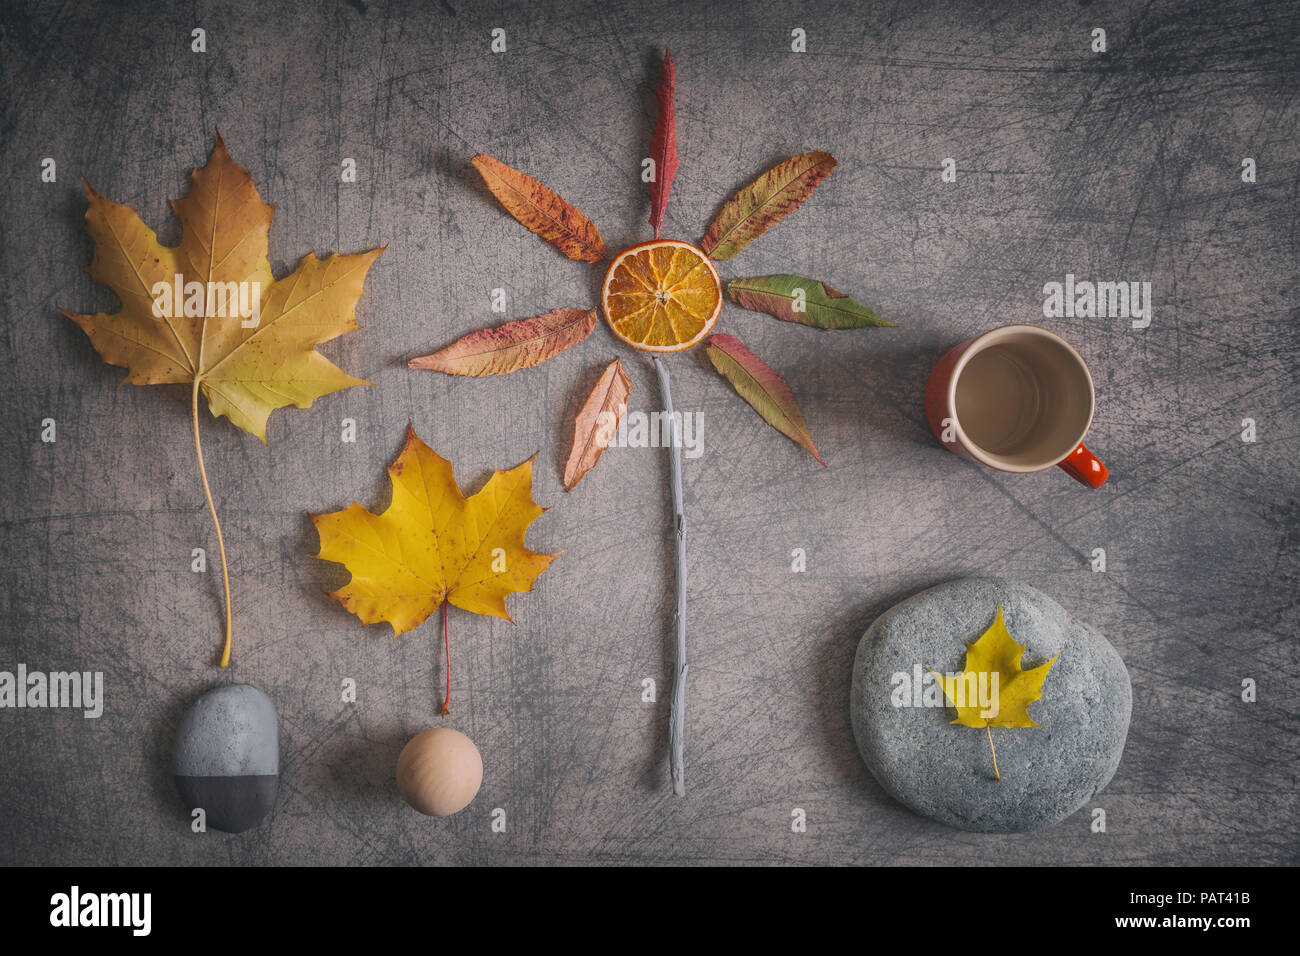 Creative autumnal composition made of a few simple objects in warm orange-yellow tones on rustic background Stock Photo